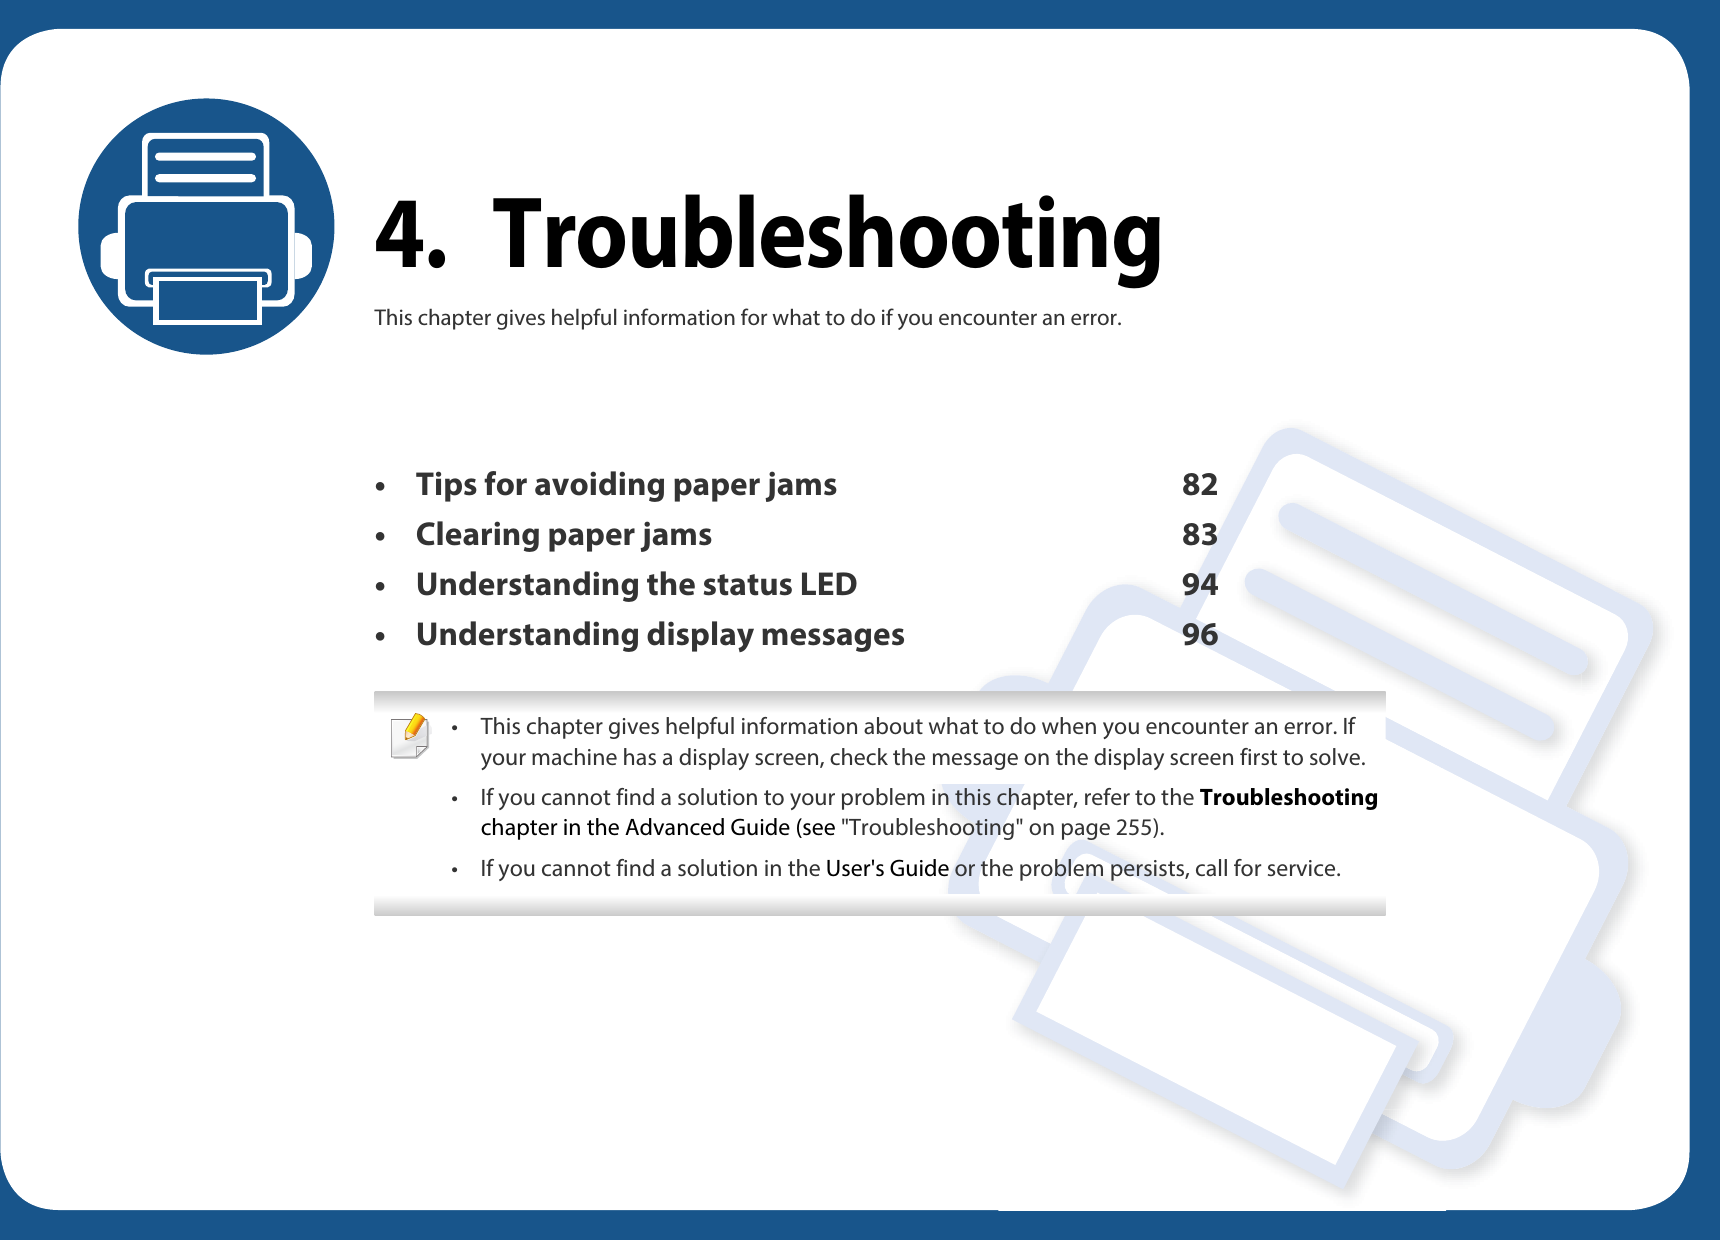 4. TroubleshootingThis chapter gives helpful information for what to do if you encounter an error.• Tips for avoiding paper jams 82• Clearing paper jams 83• Understanding the status LED 94• Understanding display messages 96 • This chapter gives helpful information about what to do when you encounter an error. If your machine has a display screen, check the message on the display screen first to solve.• If you cannot find a solution to your problem in this chapter, refer to the Troubleshooting chapter in the Advanced Guide (see &quot;Troubleshooting&quot; on page 255).• If you cannot find a solution in the User&apos;s Guide or the problem persists, call for service. 